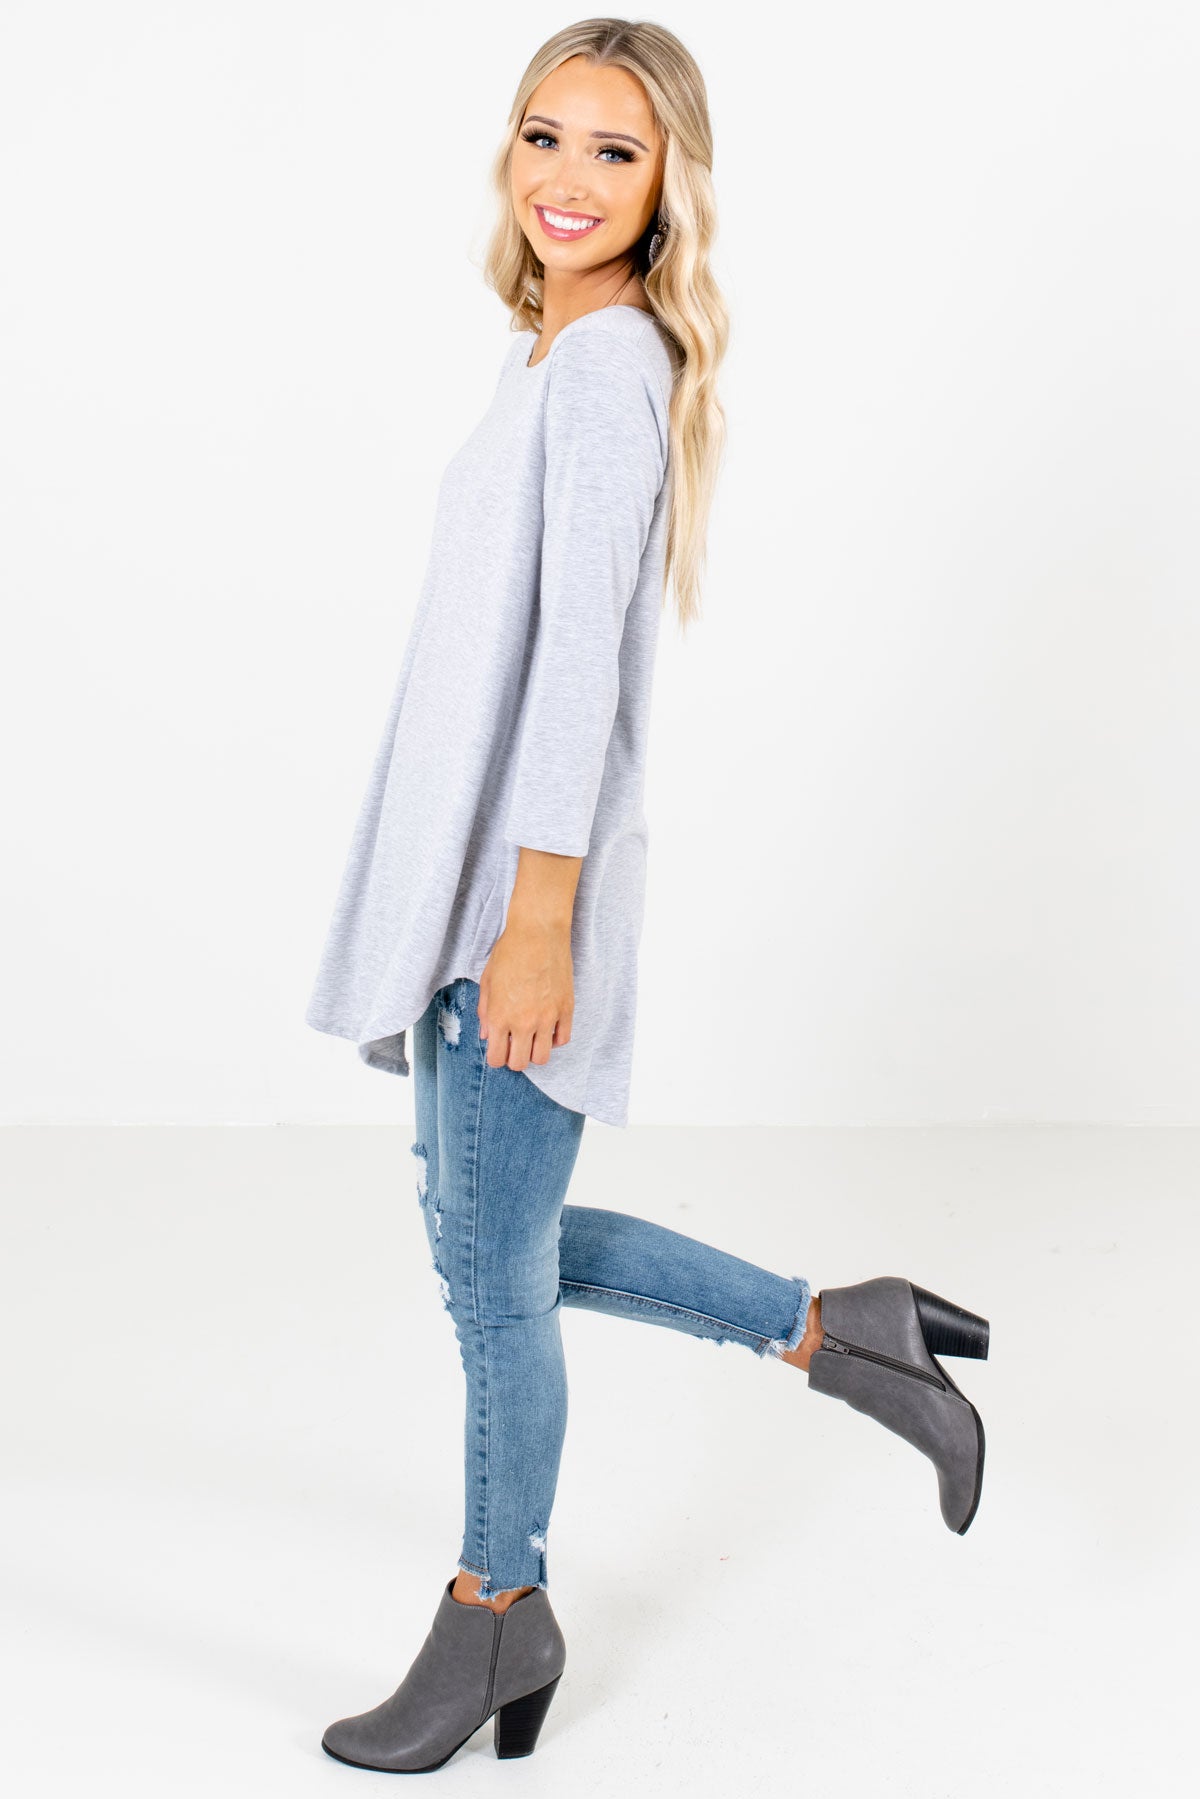 Heather Gray Affordable Online Boutique Clothing for Women